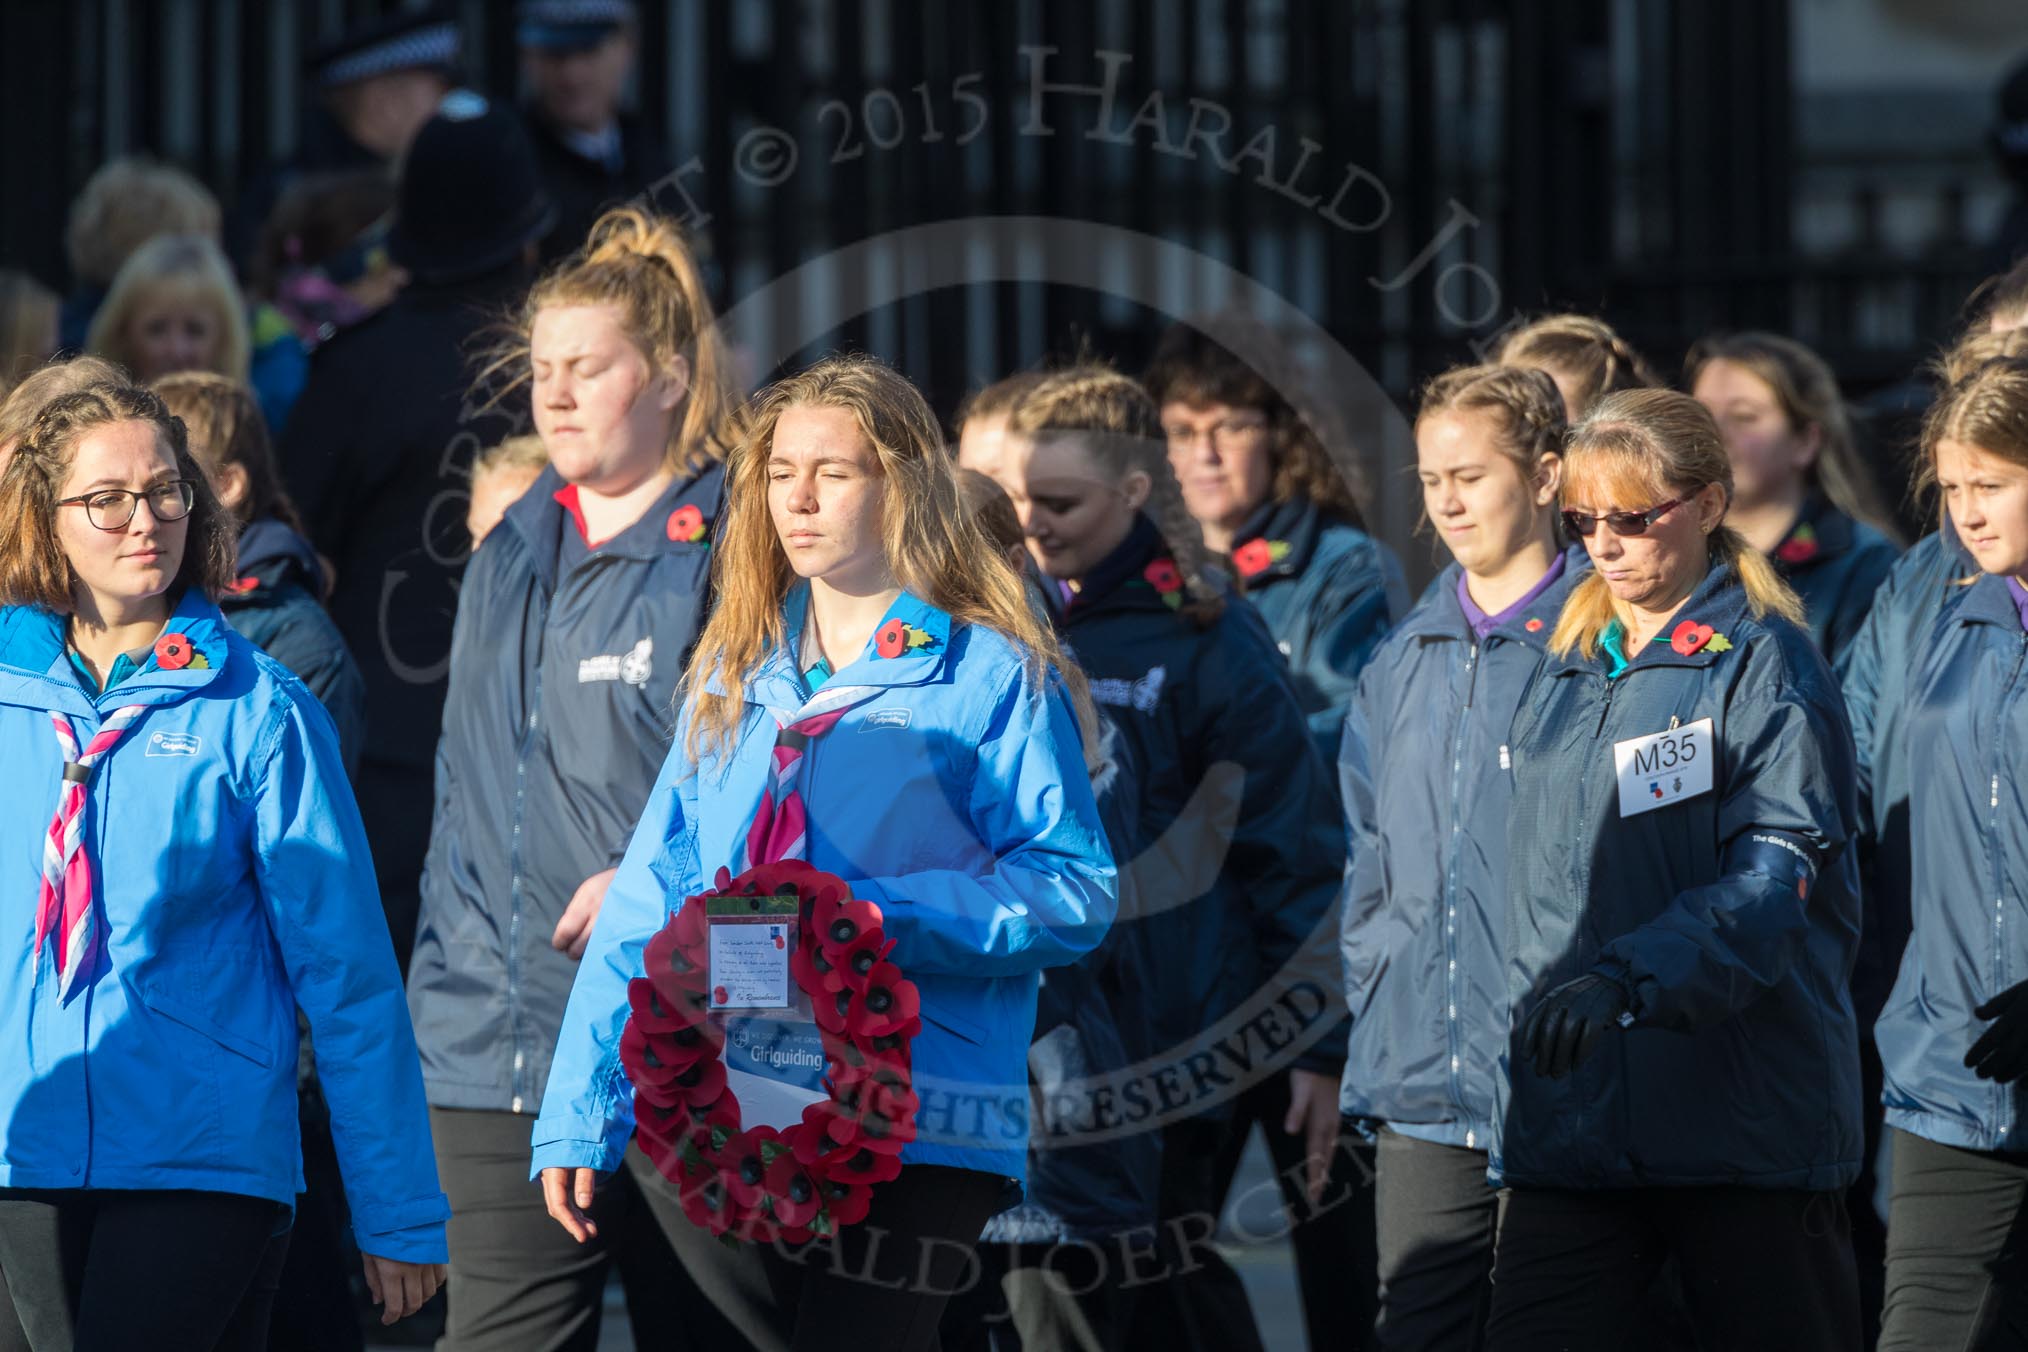 March Past, Remembrance Sunday at the Cenotaph 2016: M35 Girls Brigade England & Wales.
Cenotaph, Whitehall, London SW1,
London,
Greater London,
United Kingdom,
on 13 November 2016 at 13:18, image #2865